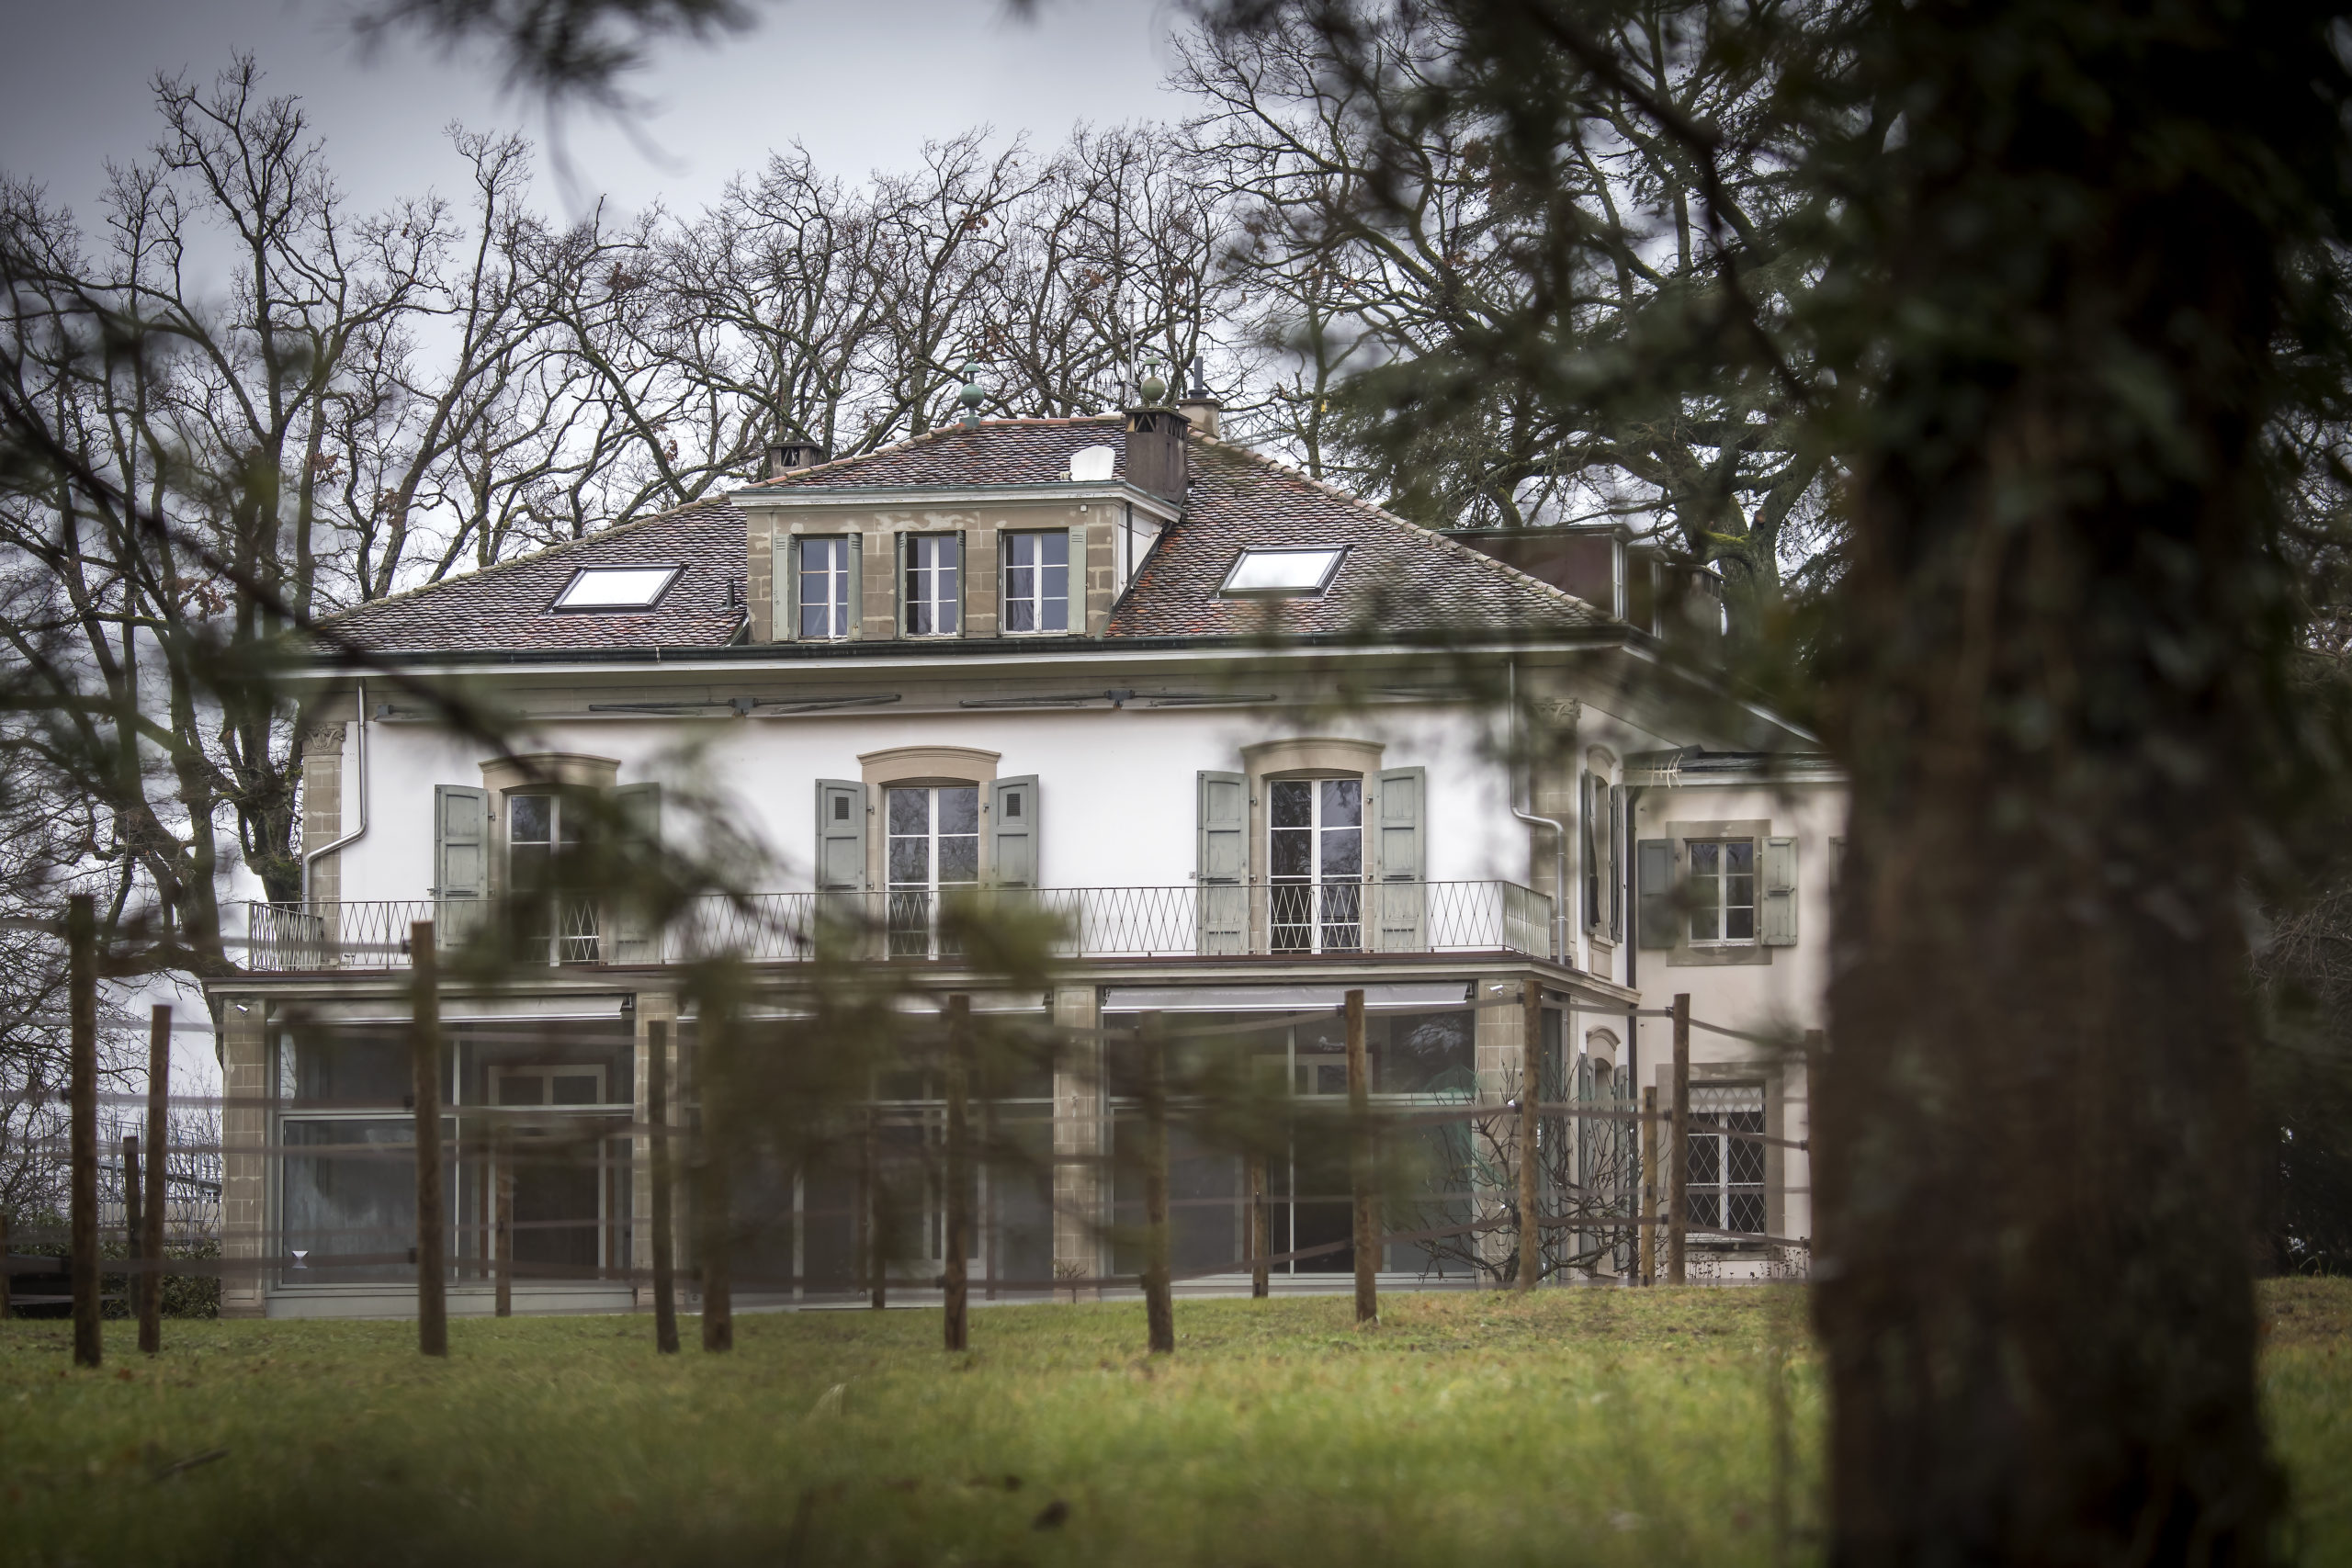 02.02.2021;Vandoeuvres; Geneva; A cocoon at 29 million francs for Robbie Williams; The British singer has taken up residence in a sumptuous villa covering an area of 8,500 m²  in the town of Vandoeuvres (GE). The new Robbie Williams HousePhoto  Jean-Guy Python